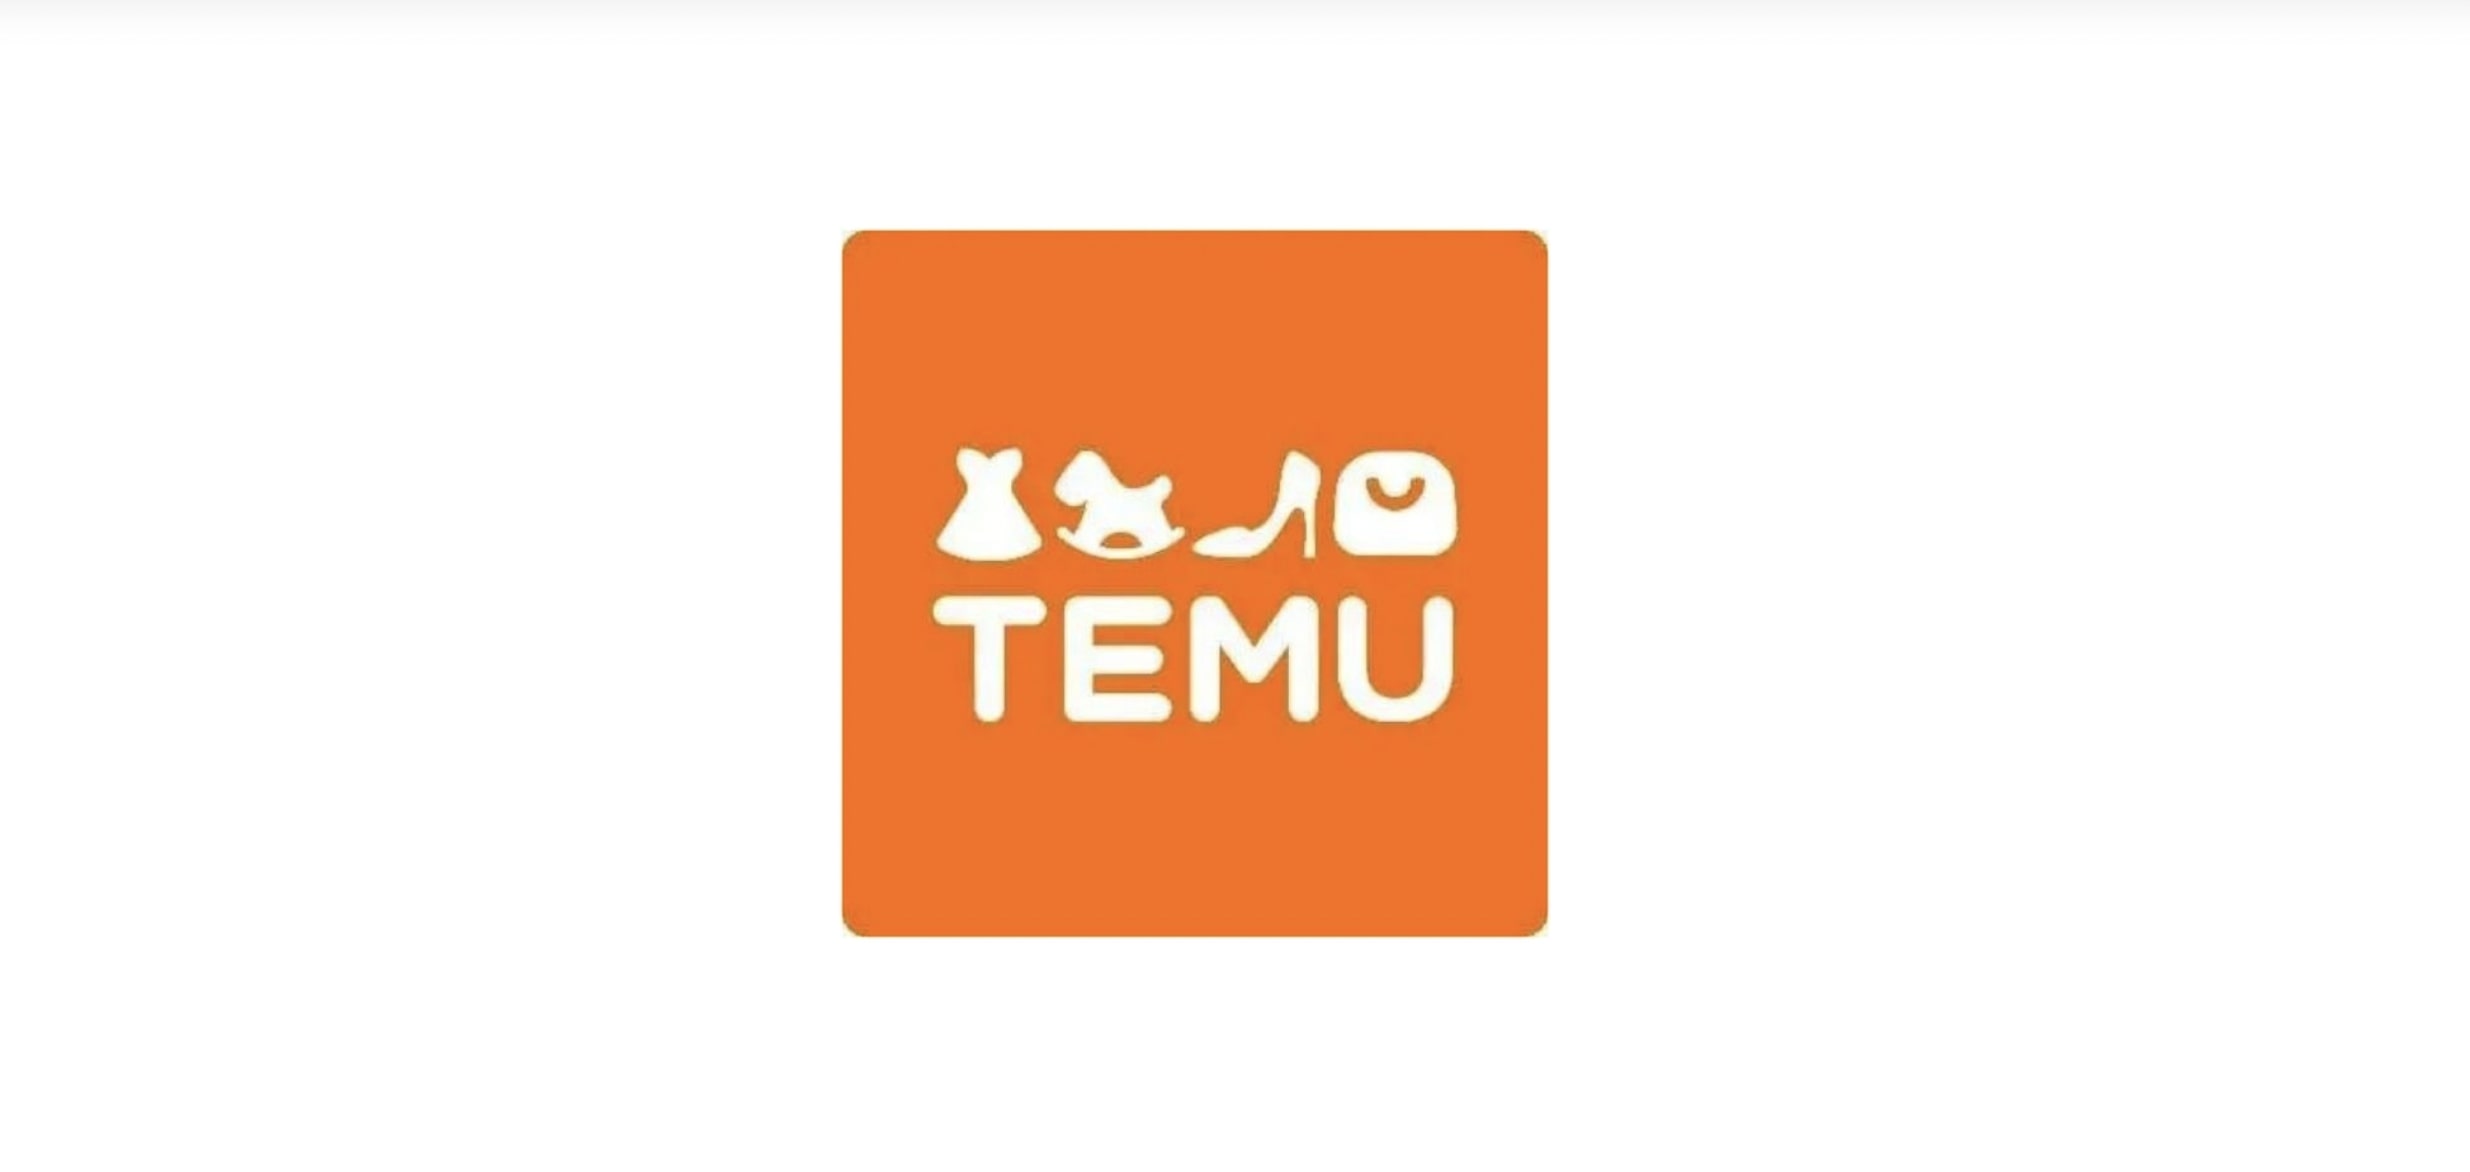 Temu in Position to Take US Online Shopping by Storm